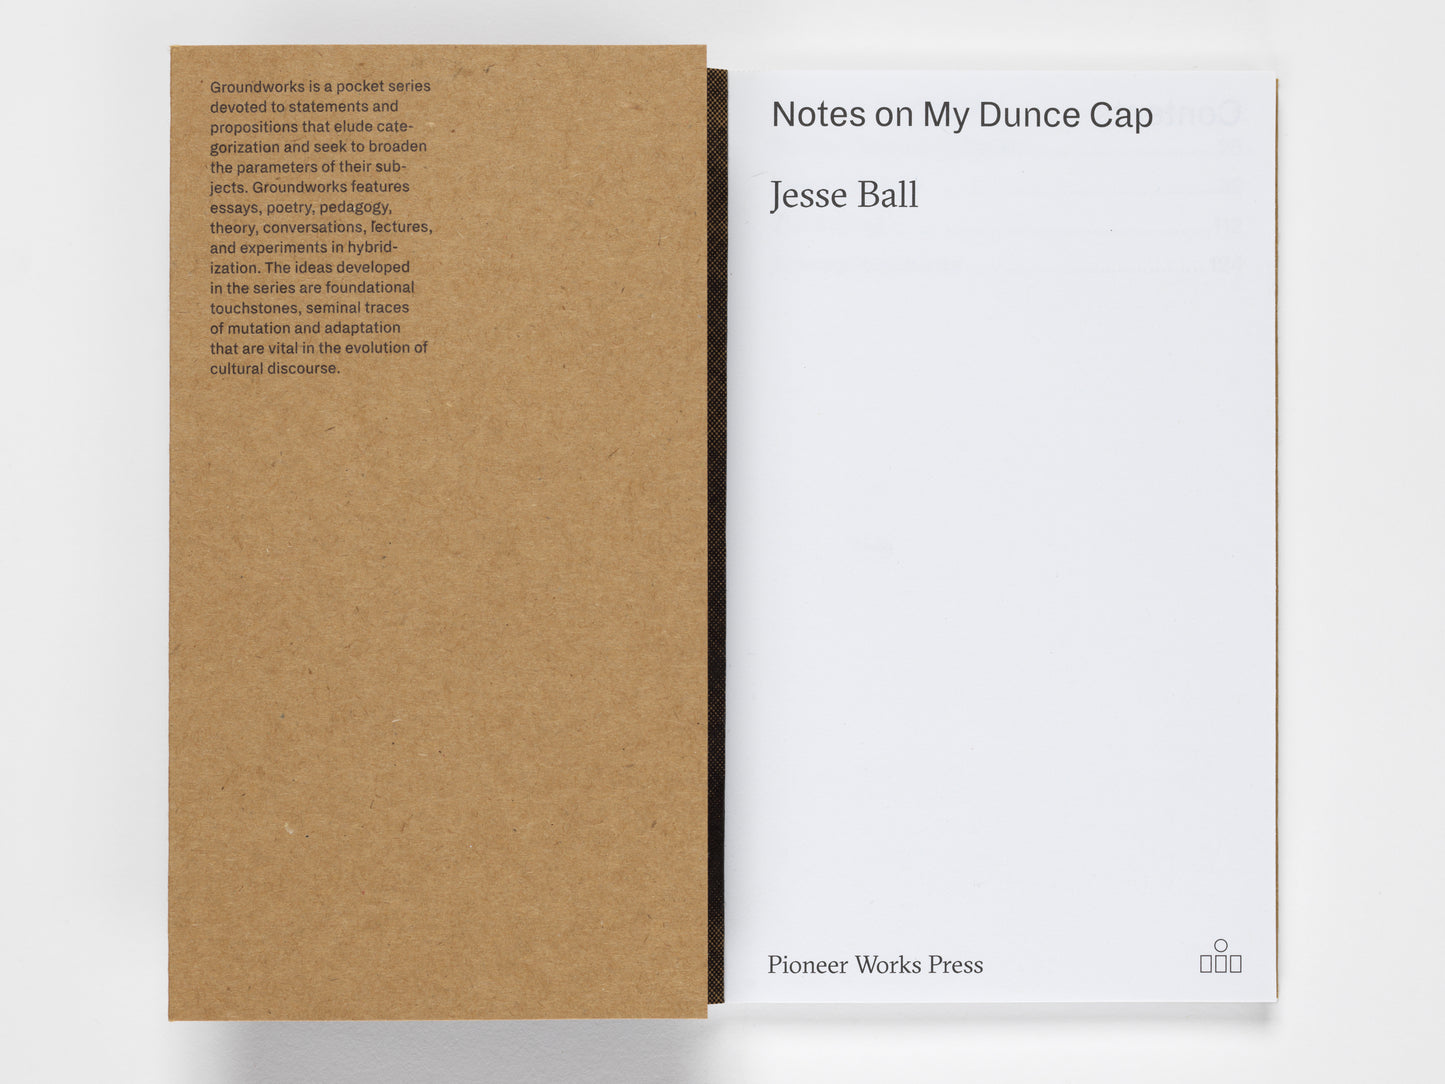 Jesse Ball: Notes on My Dunce Cap